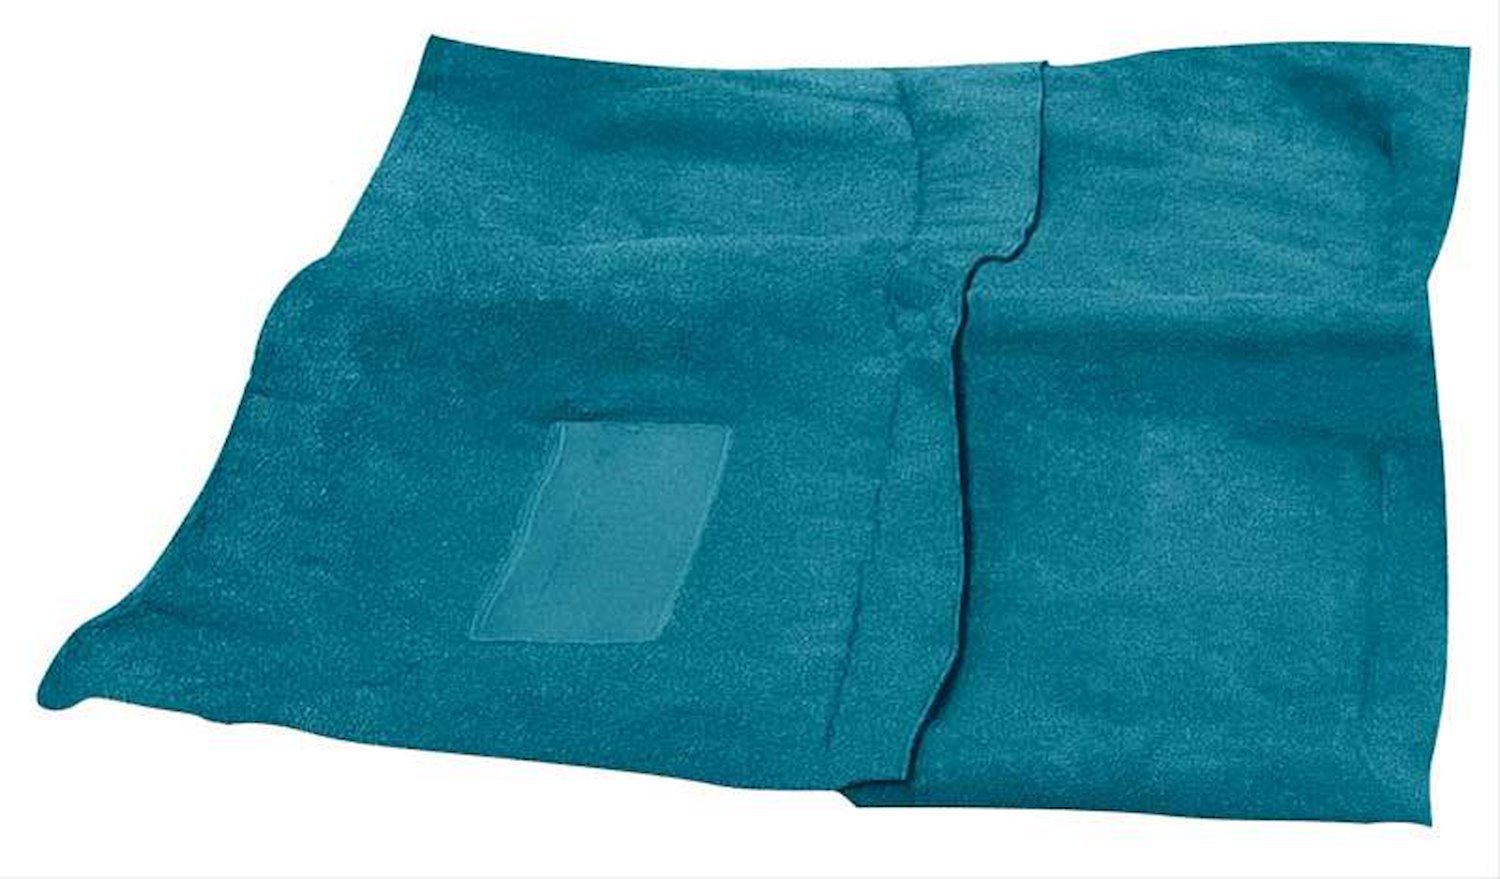 MA530505 Loop Carpet With Tails 1967-69 Dodge Dart Convertible With 4-Speed Aqua